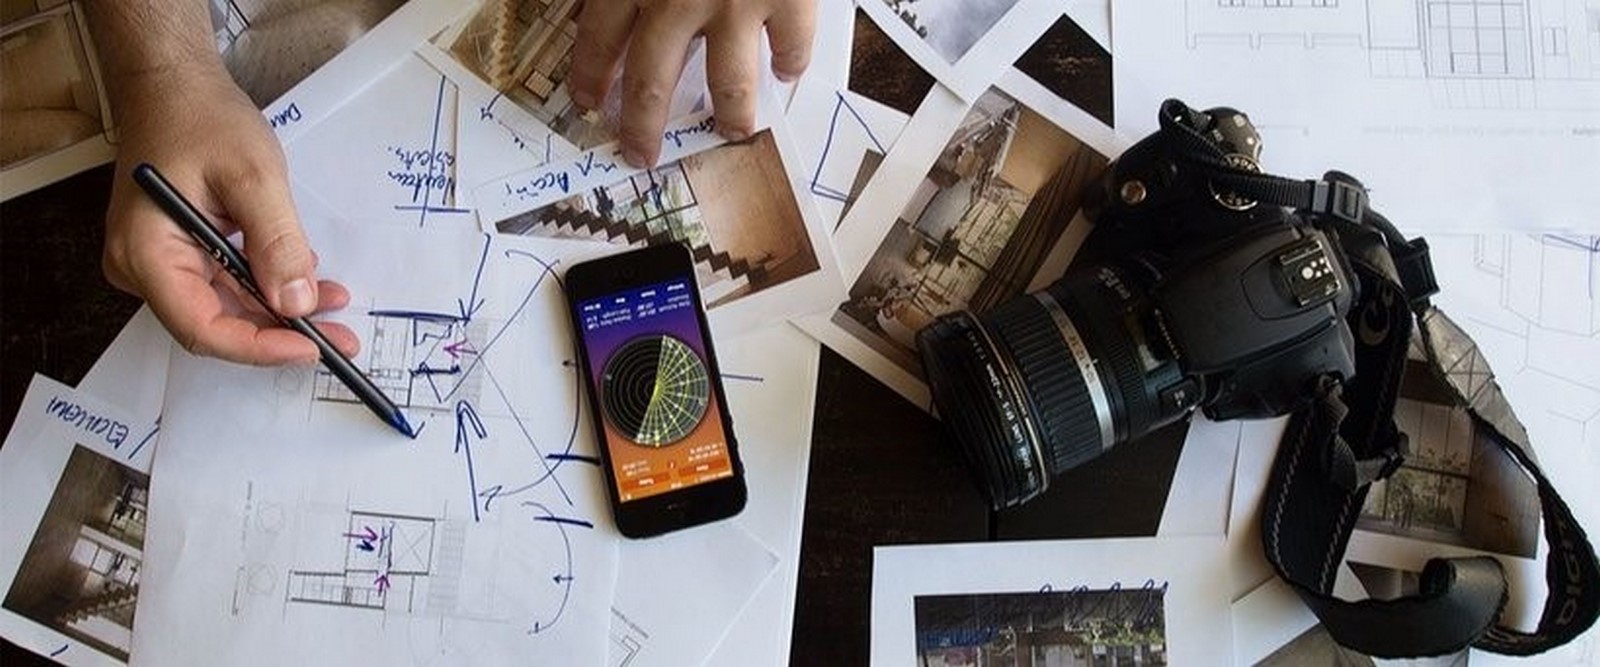 10 Architectural Photography courses everyone should know - Sheet2